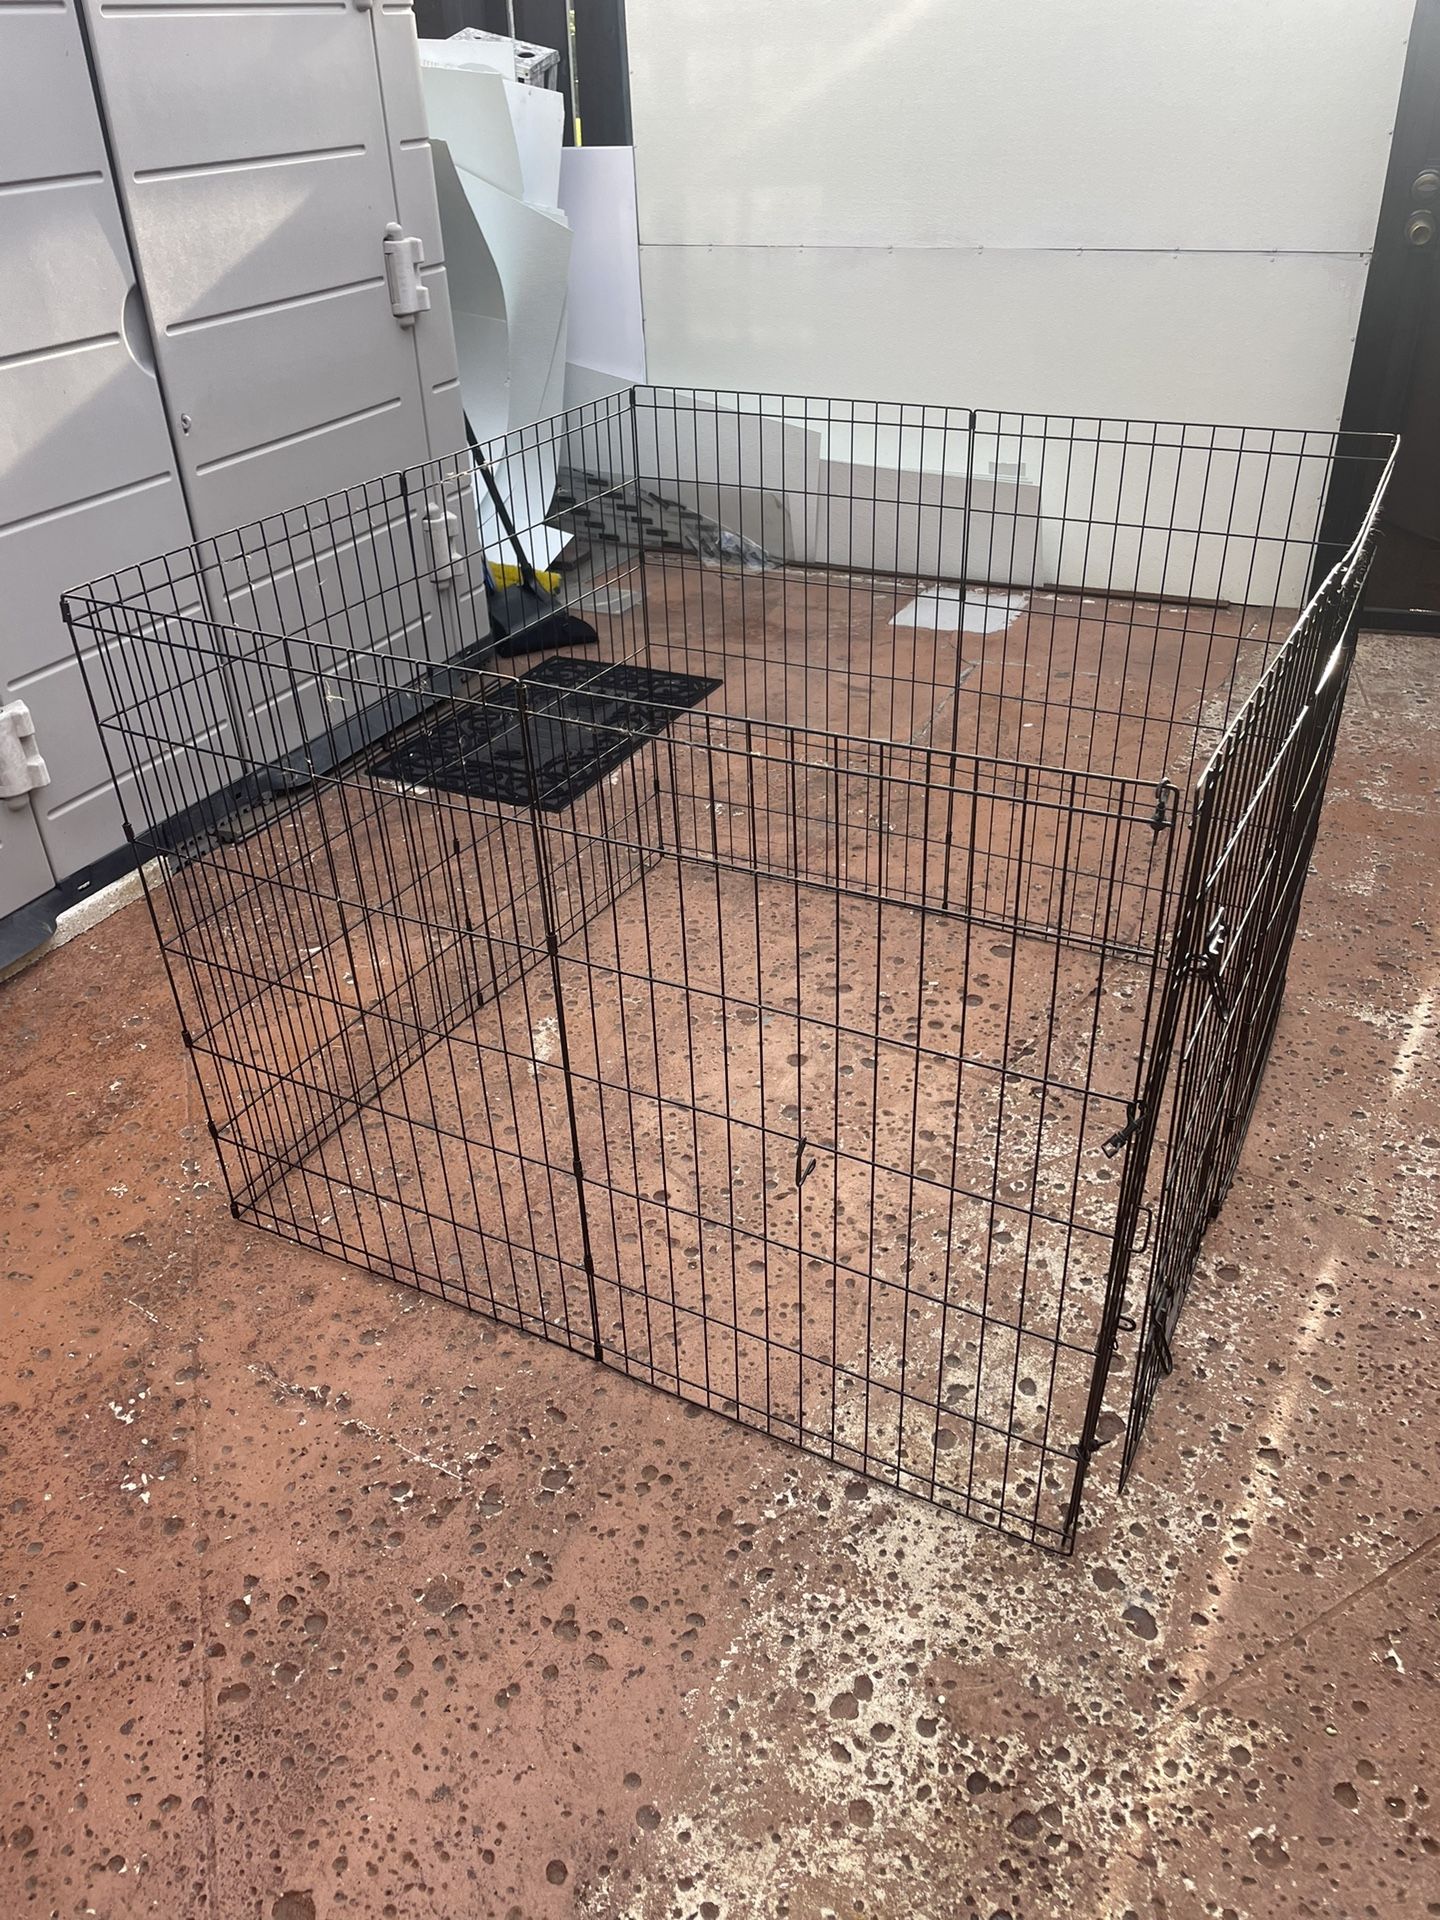 Dog Crate Folding Big Metal Wire Dog Kennel Cage with Tray for Small/Medium/Large Dogs Indoor Outdoor Travel Use, Black 